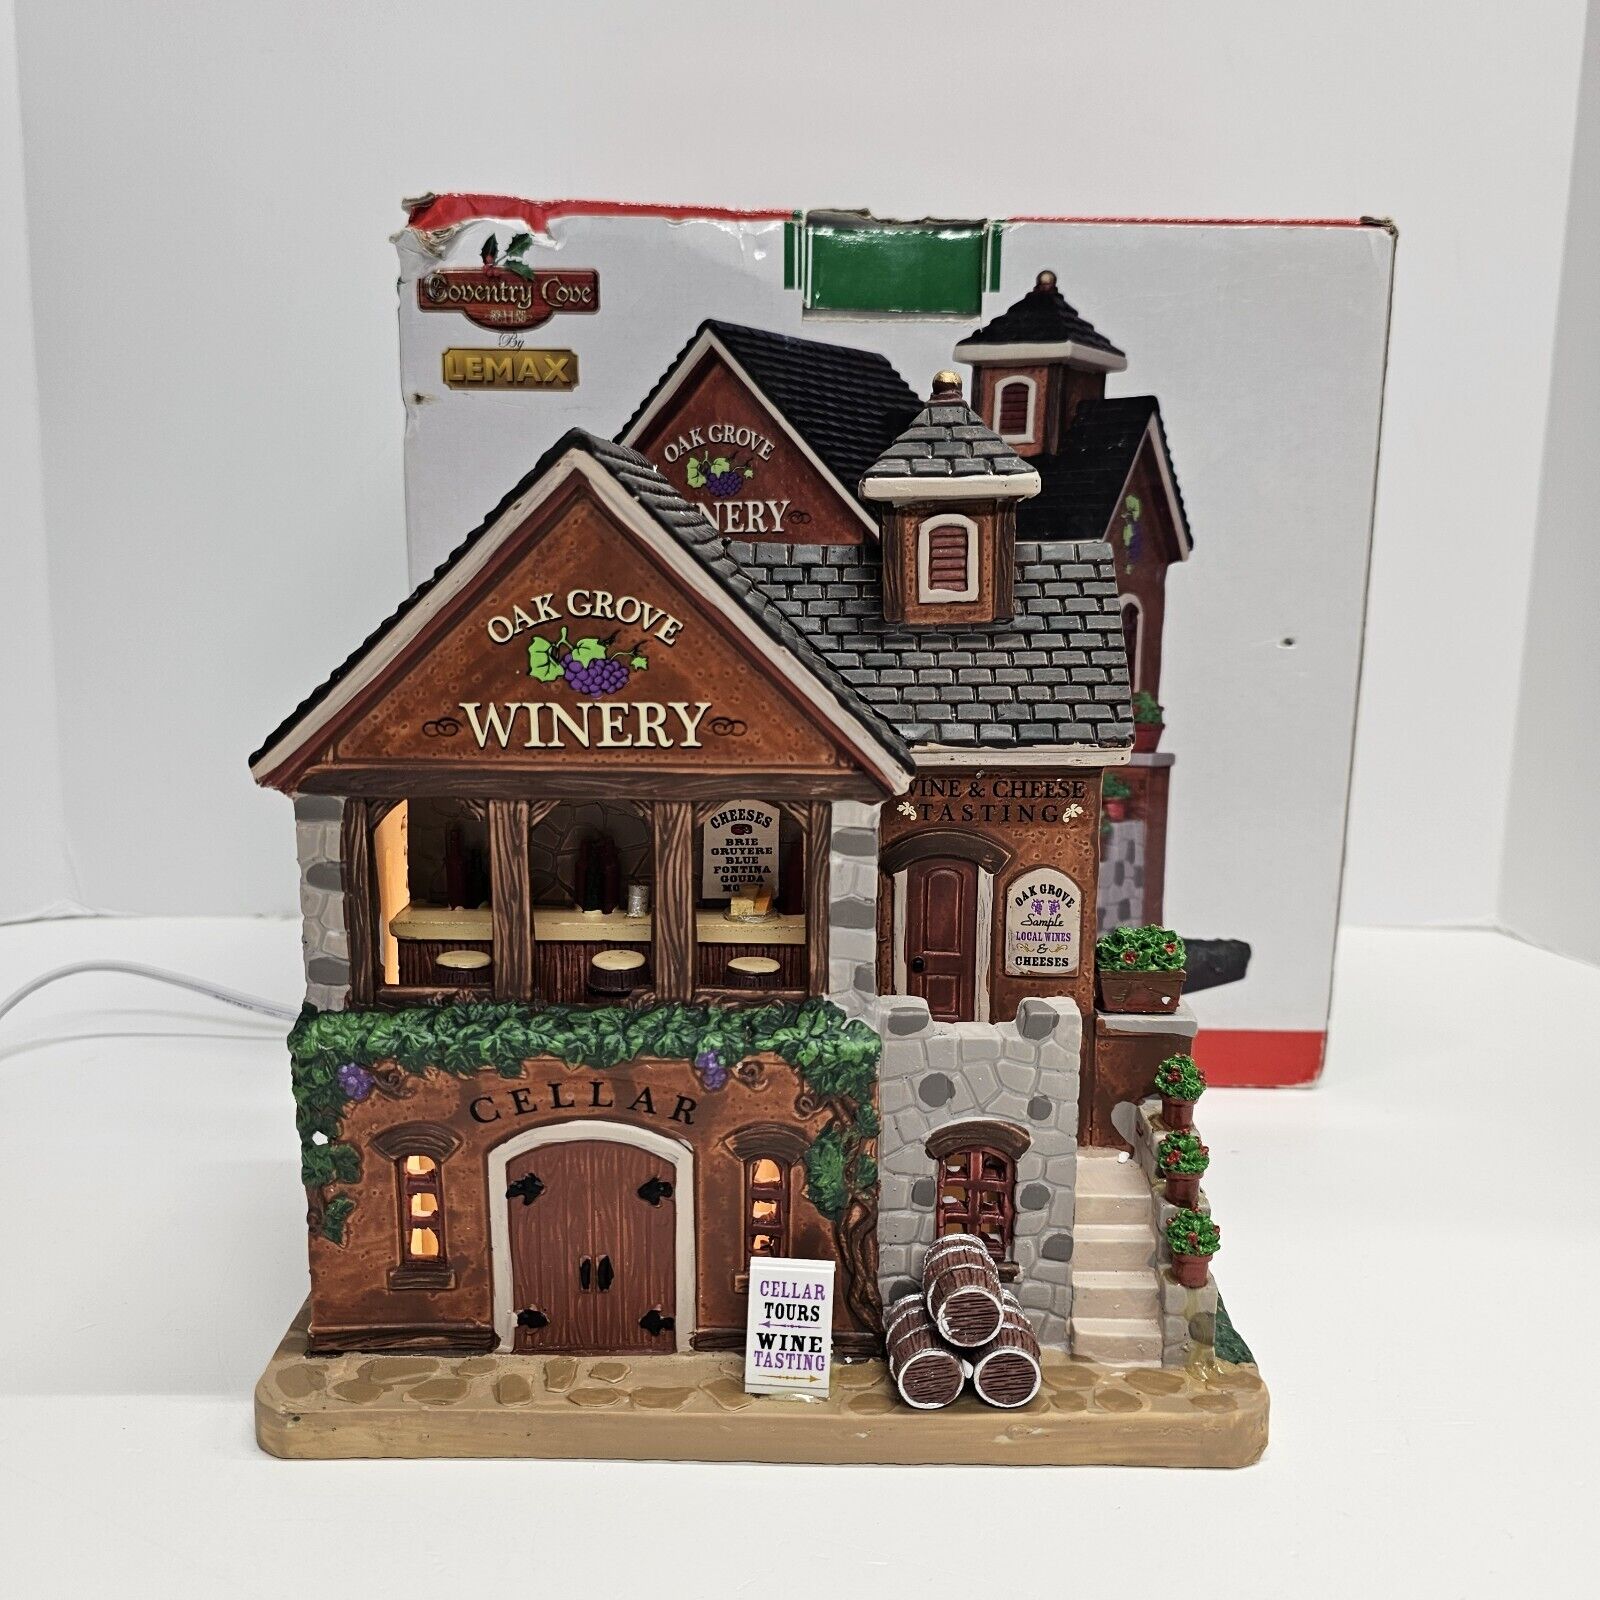 Lemax Coventry Cove Oak Grove Winery 2015 Lighted Christmas Village Building